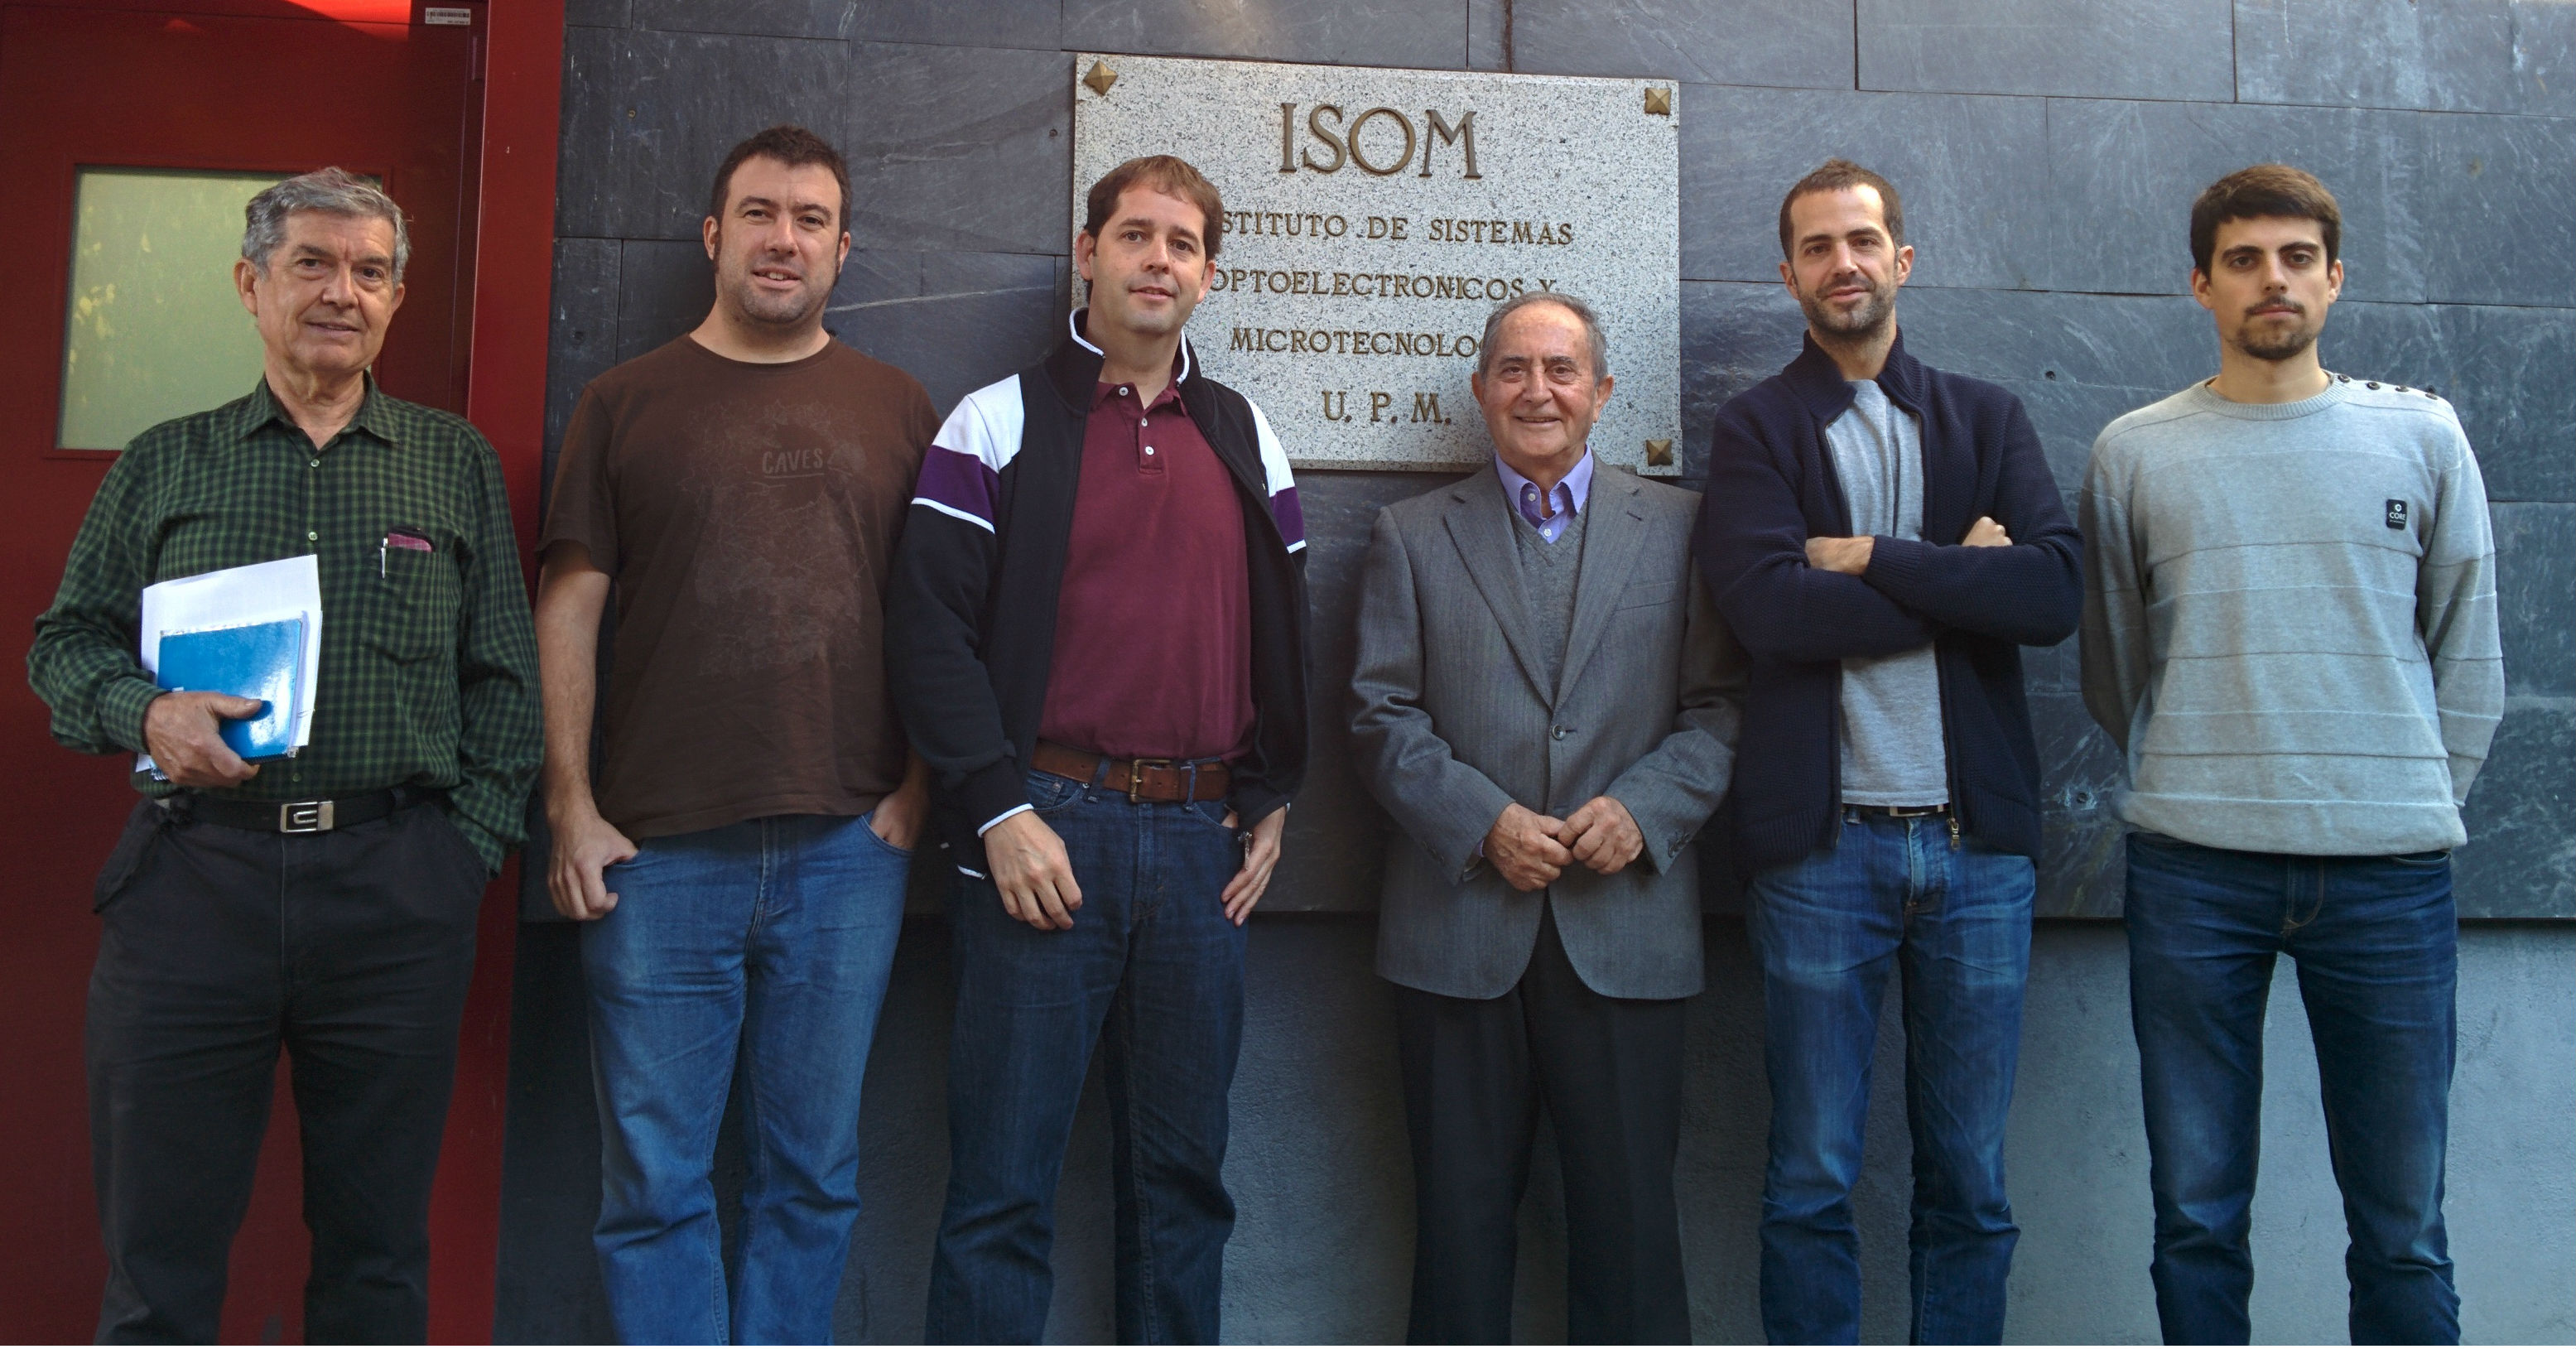 ISOM research team photo